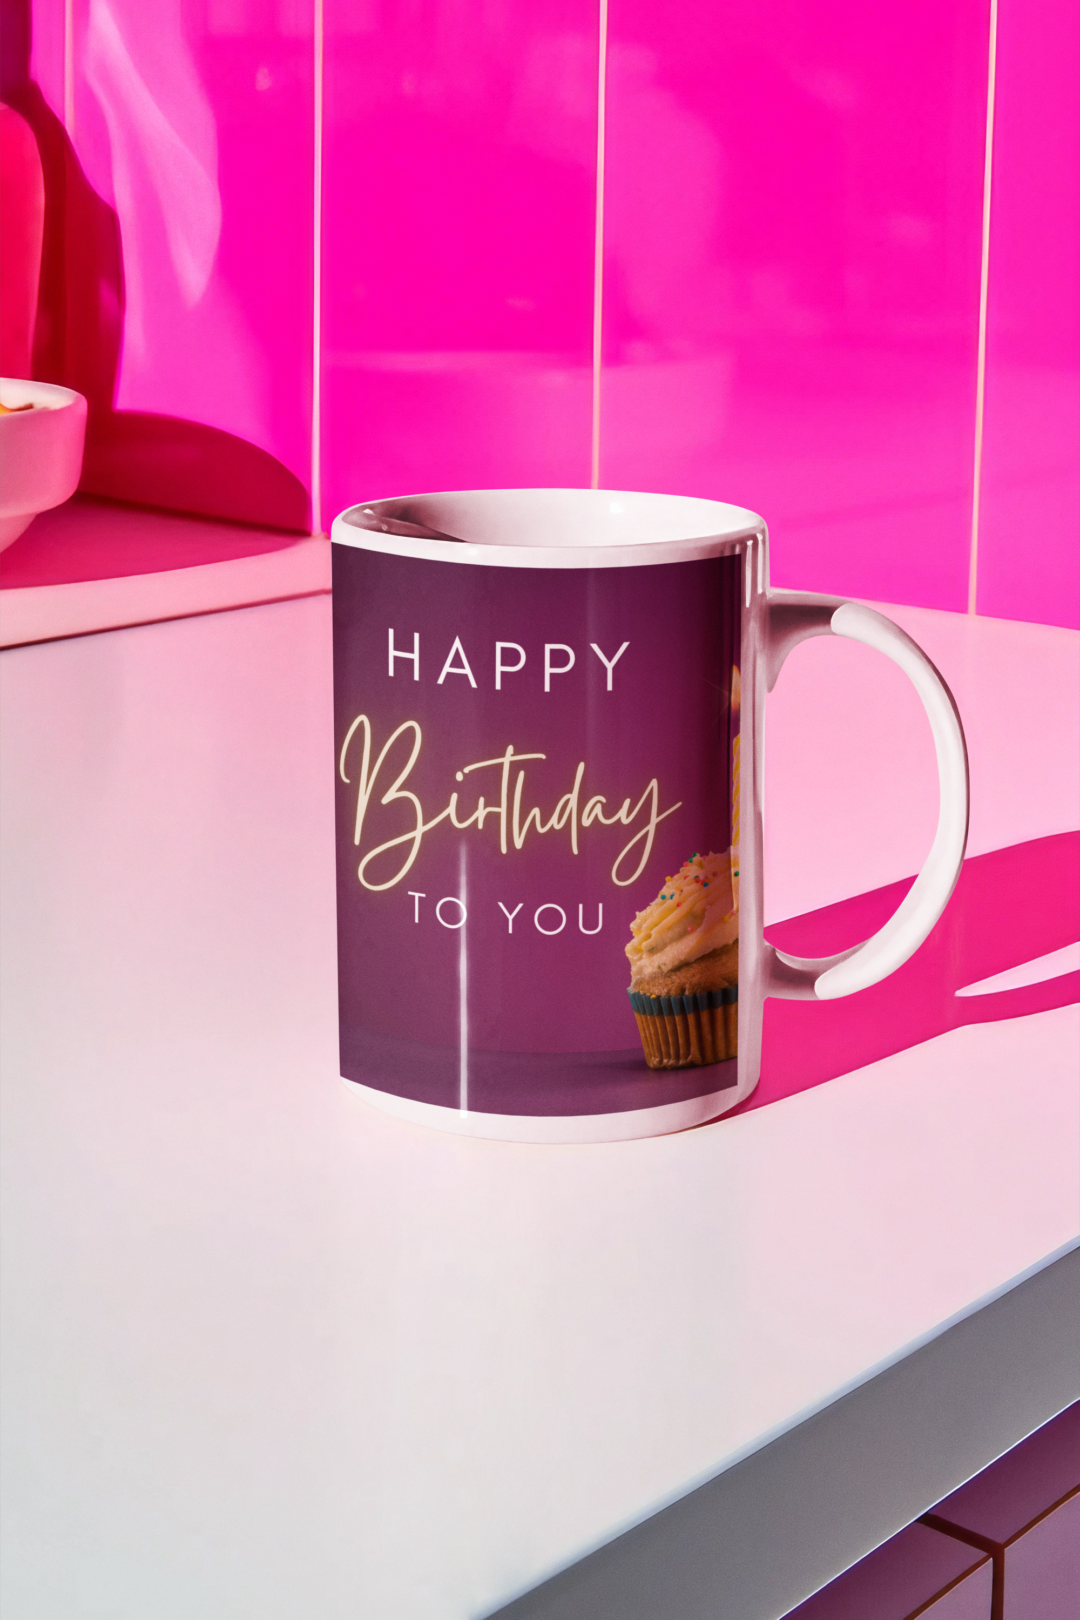 Gifts Crux11 oz (325ml) Mugs for an Unforgettable 18th Birthday Celebration!